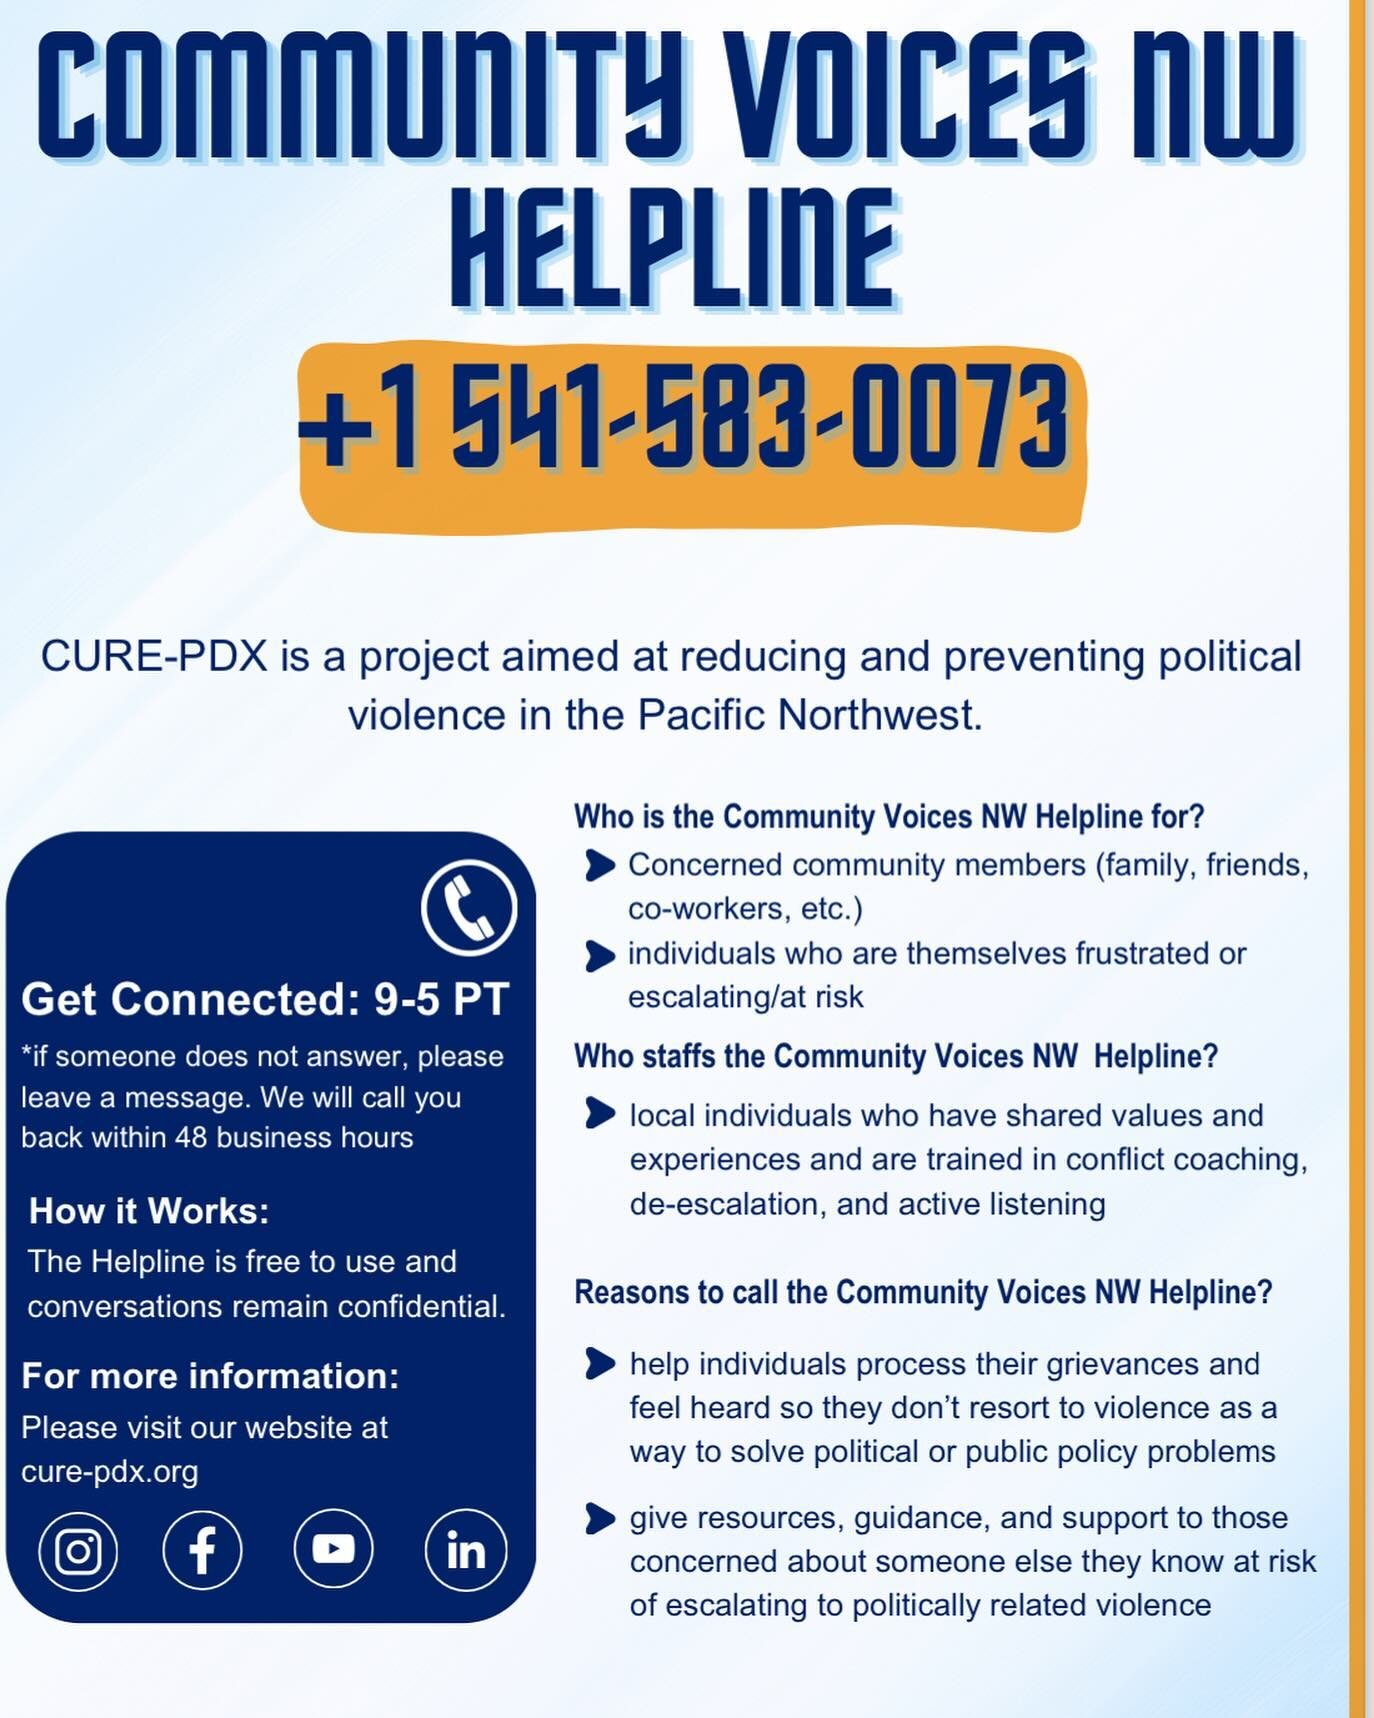 If you or someone you love is experiencing escalation or polarization around political issues and want an outlet or support, call our confidential hotline at 1-541-583-0073